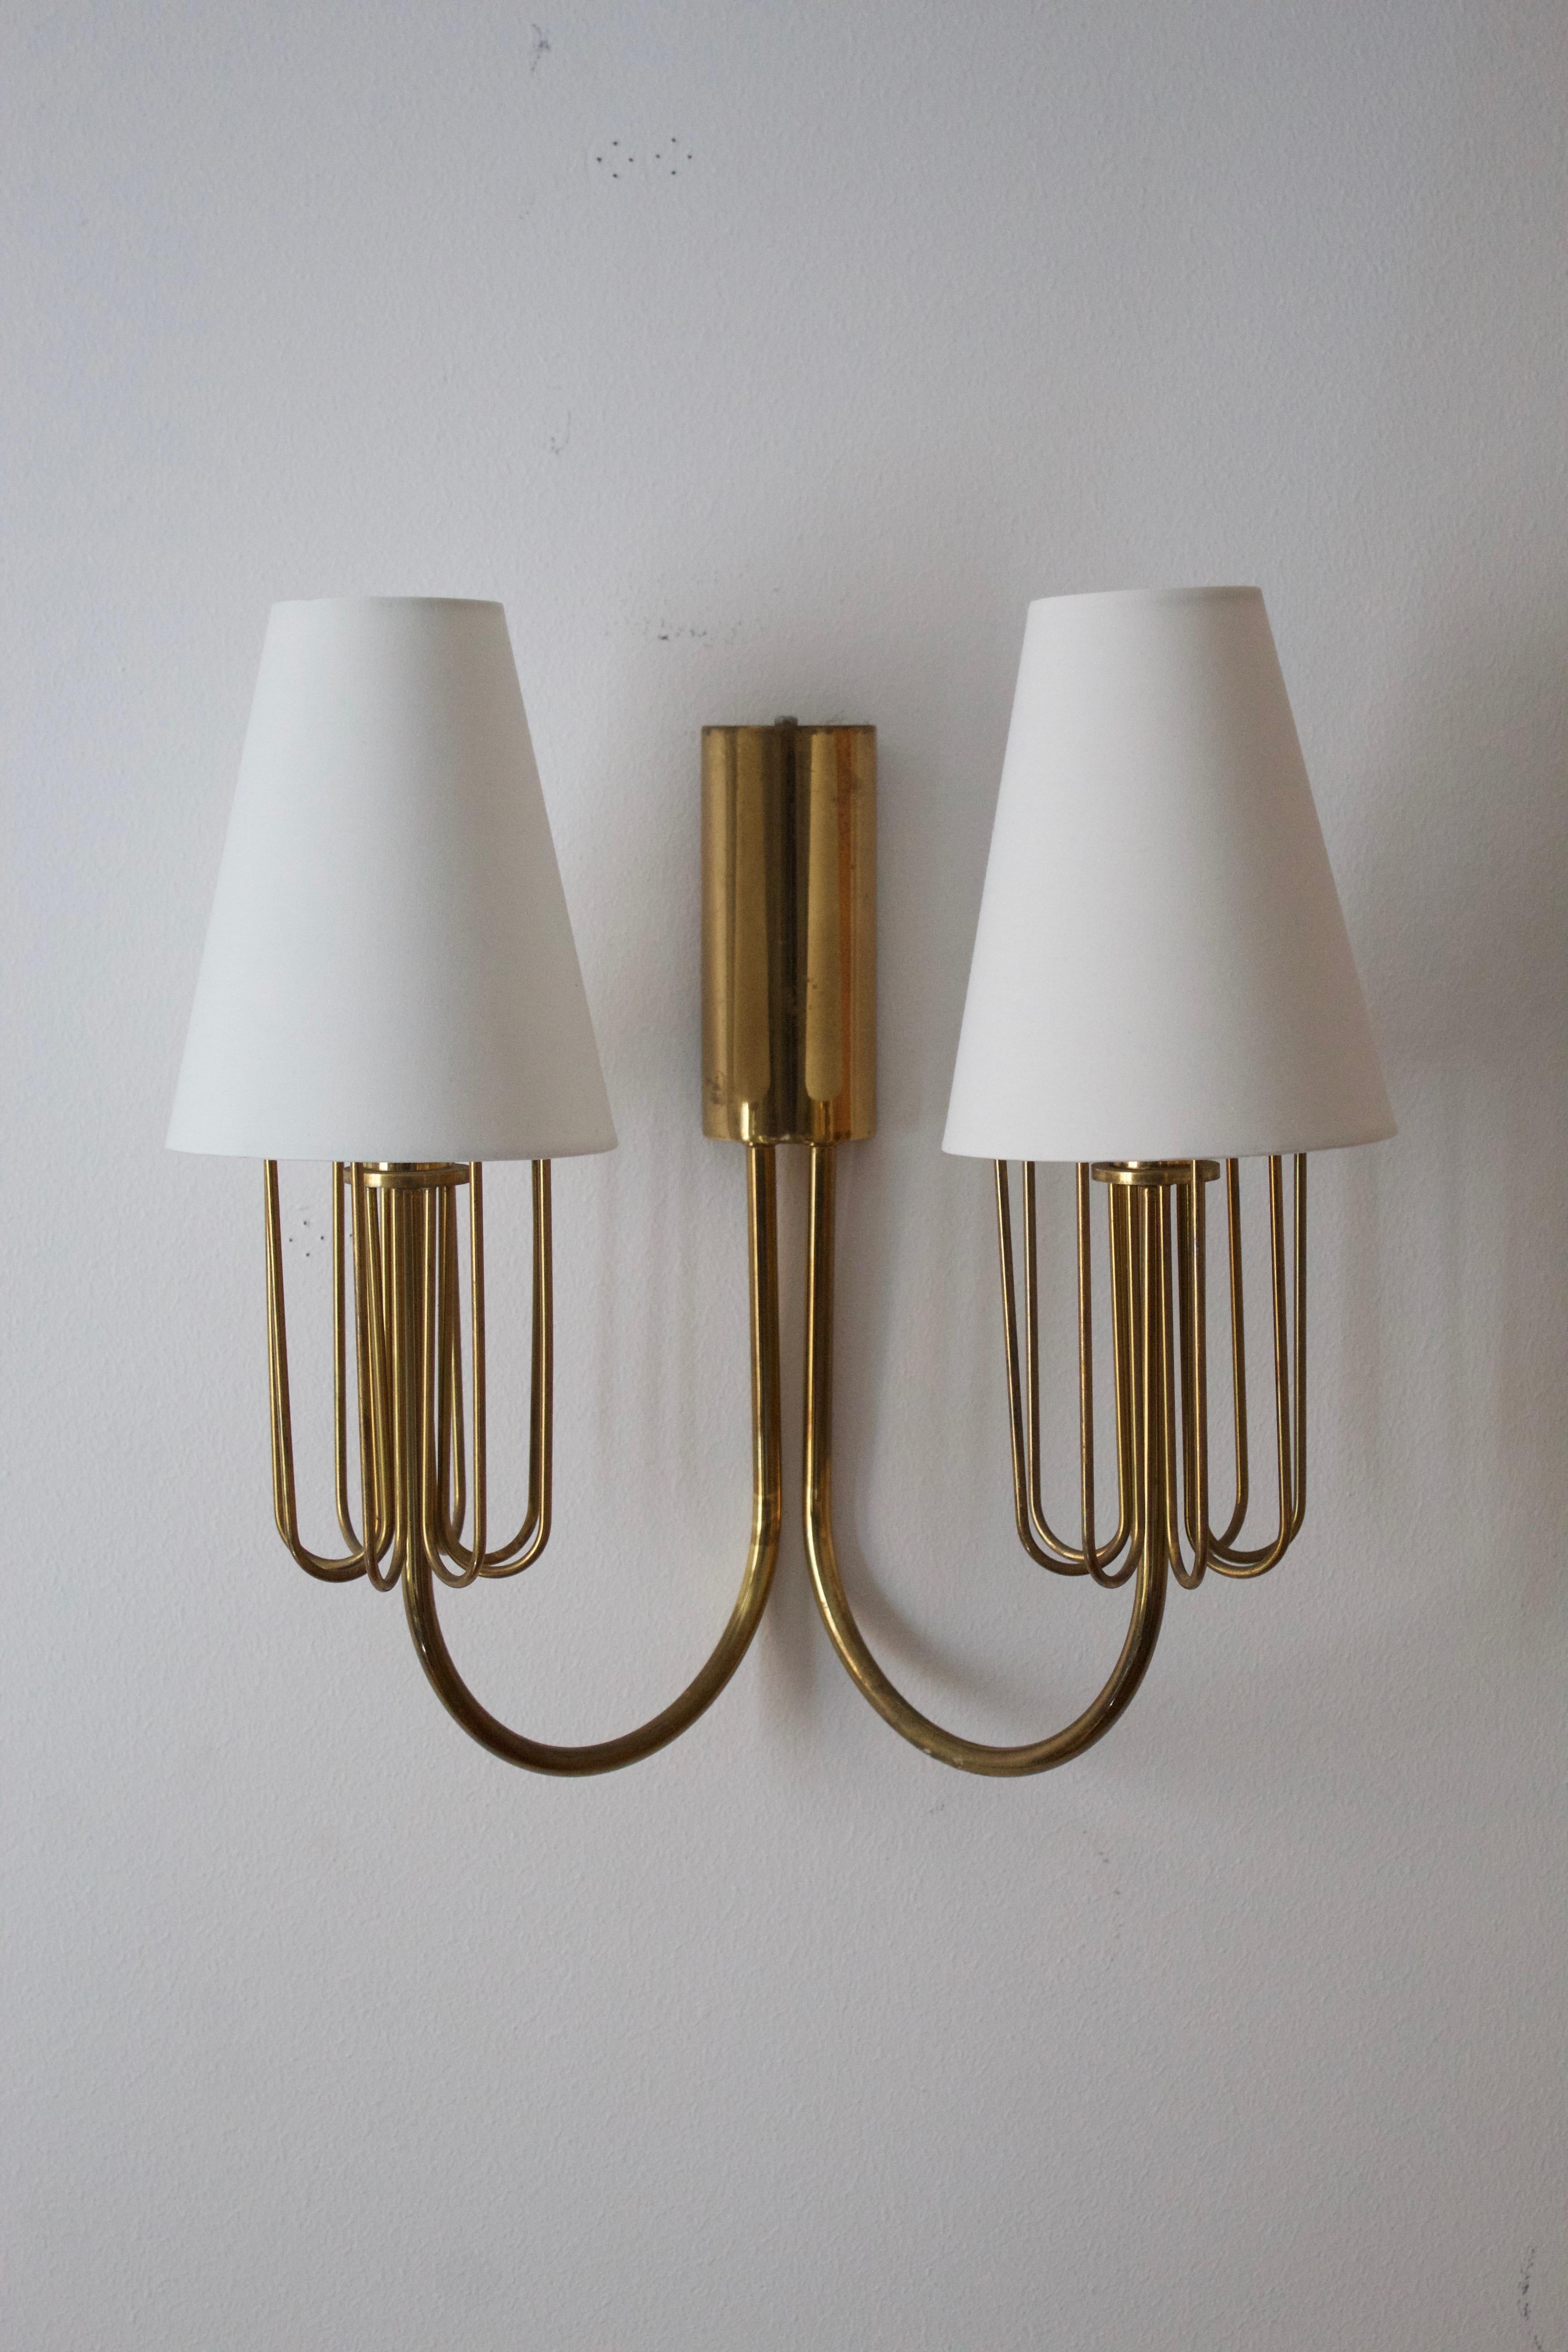 A two armed wall light / sconce. Designed and produced in Sweden, c. 1950s. 

   

Brand new high-end lampshades.

Other designers of the period include Paavo Tynell, Jean Royère, Hans Bergström, Hans-Agne Jakobsson, and Kaare Klint.